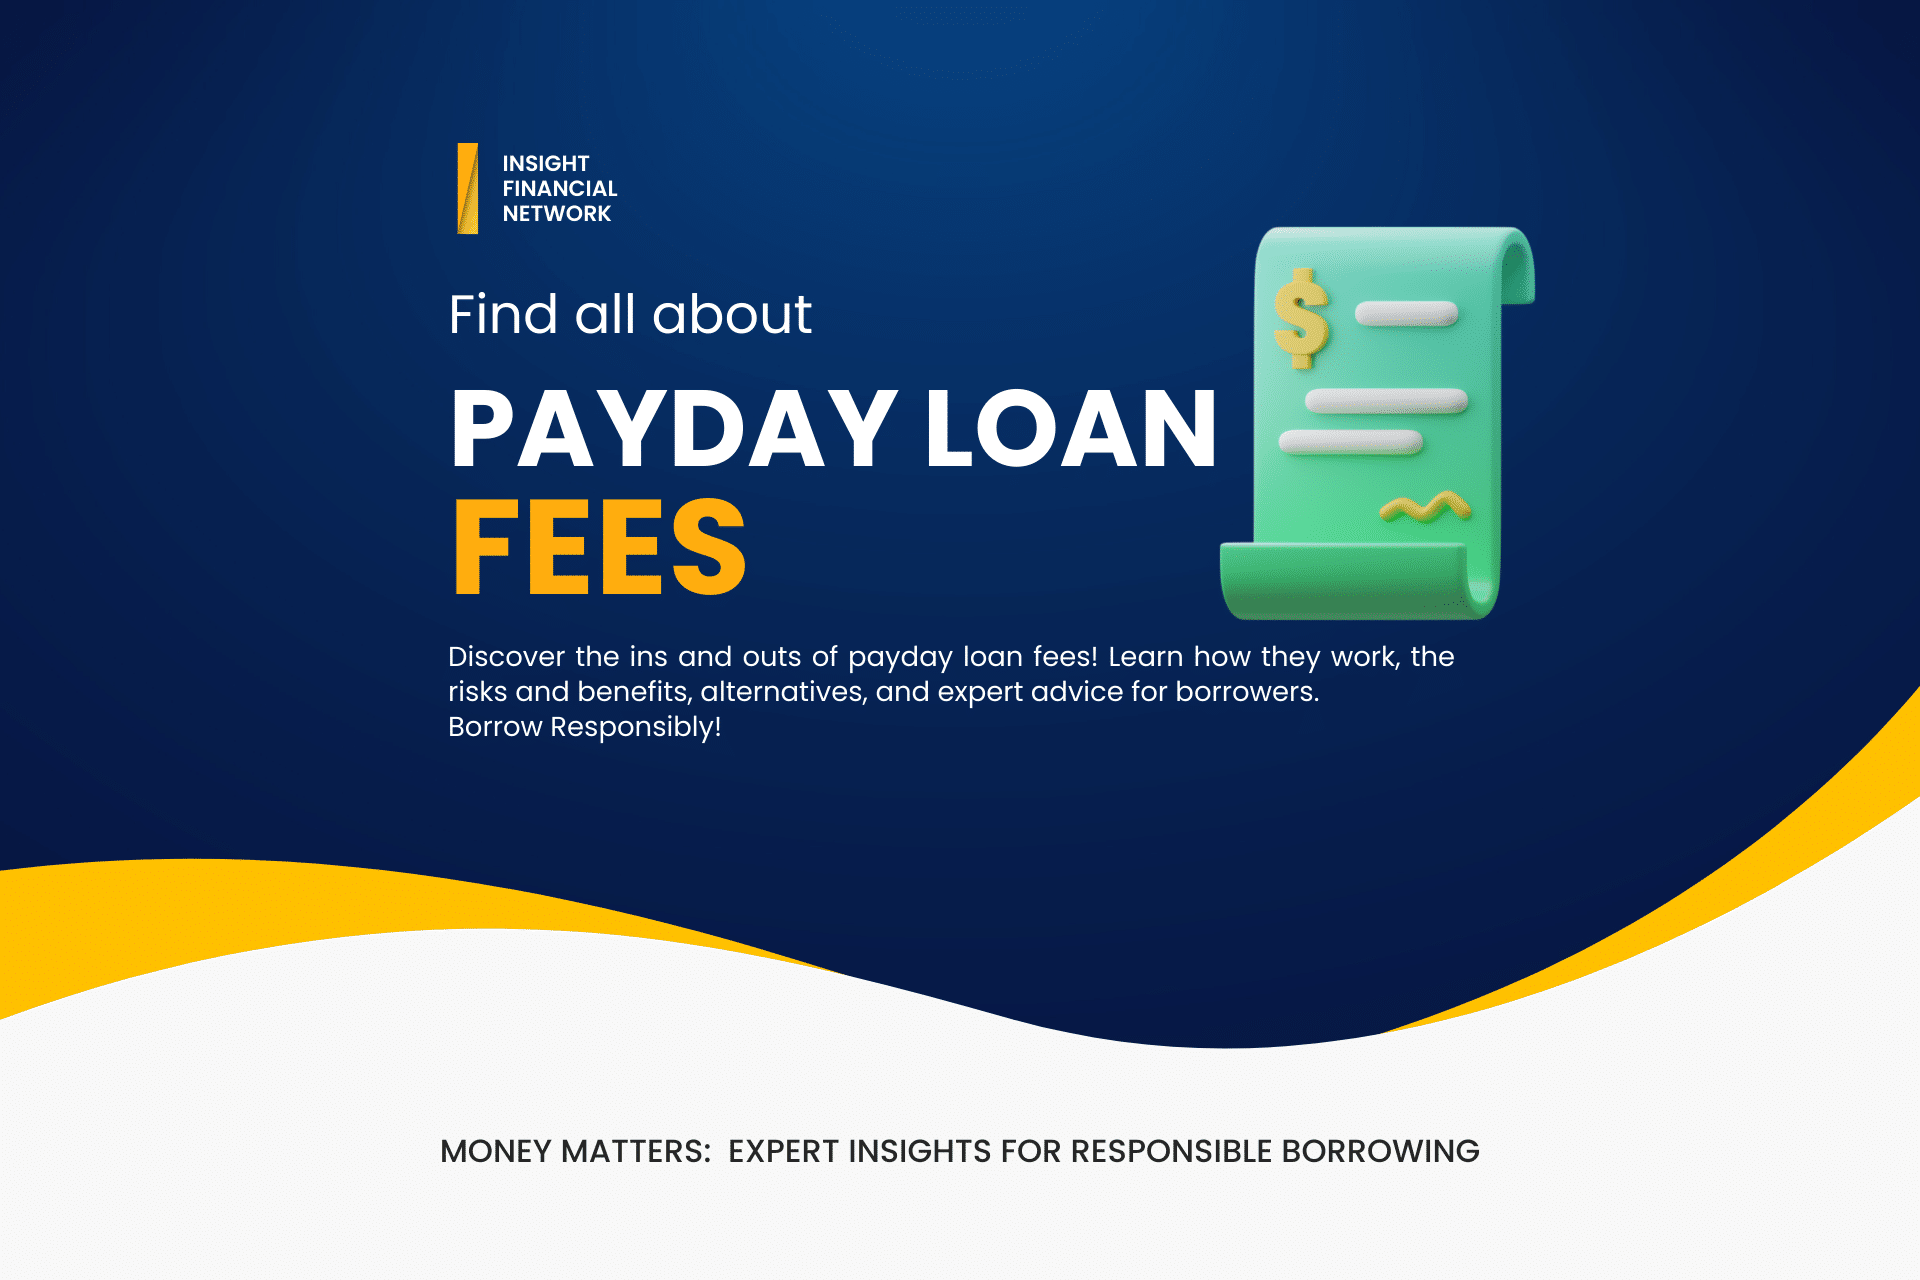 Payday Loan Fees